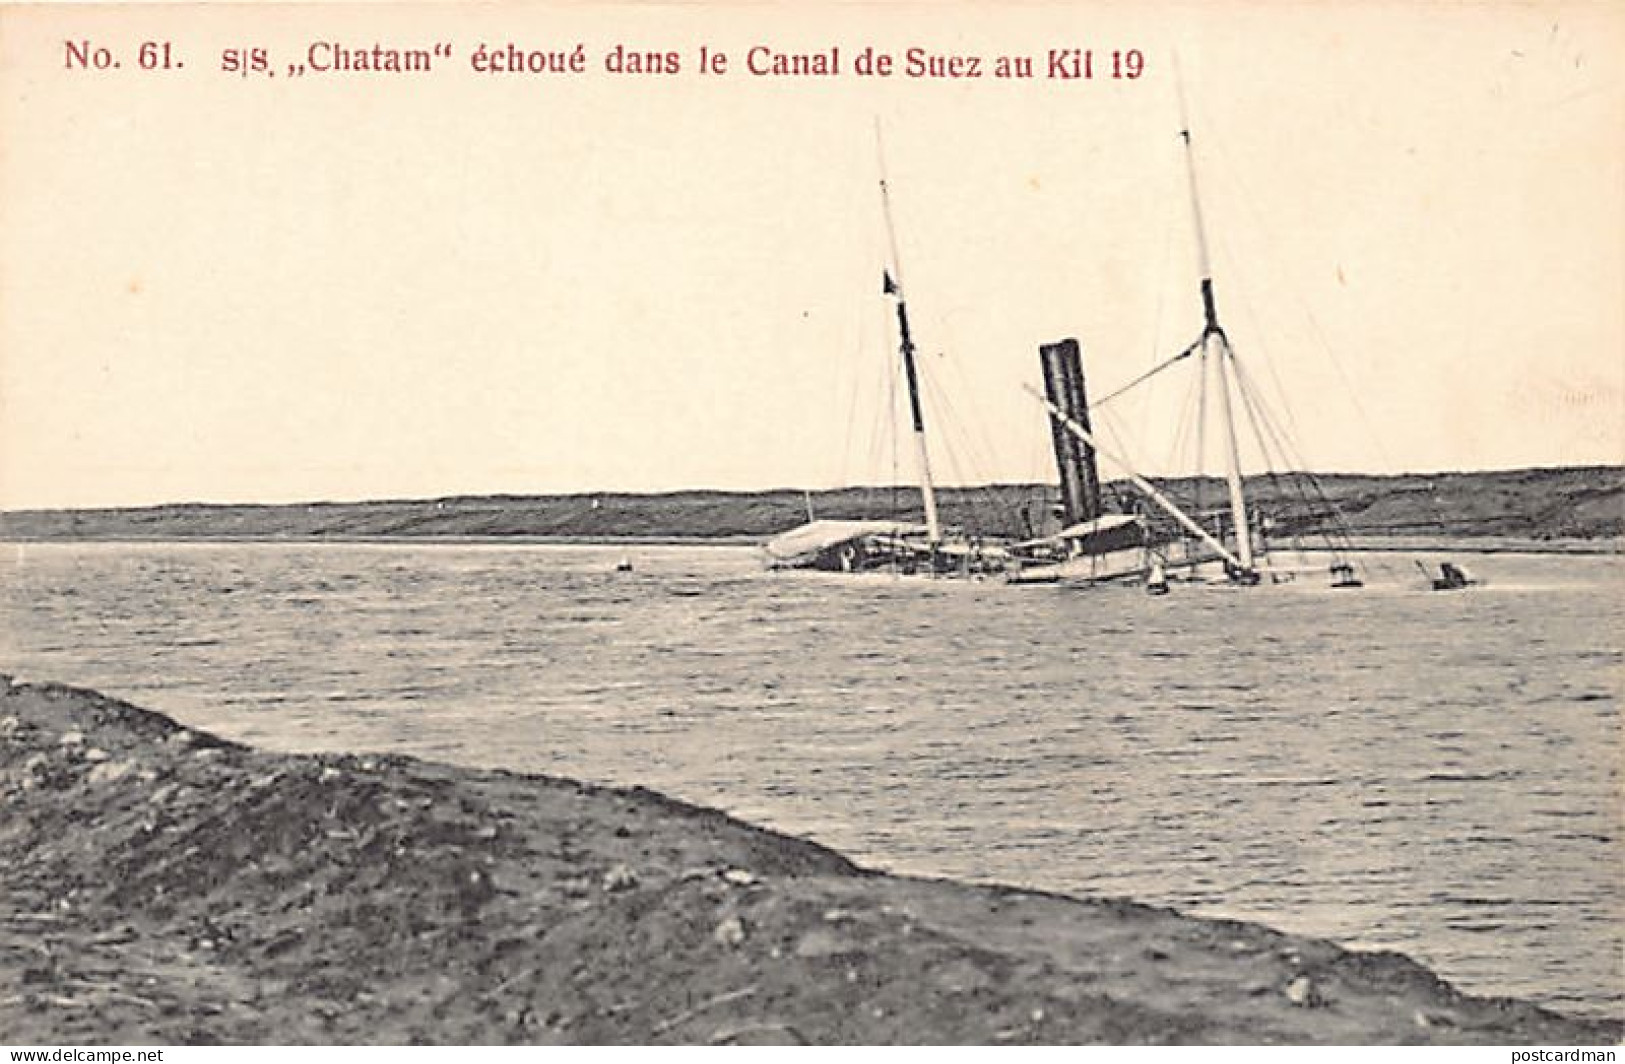 Egypt - S.S. Chatham Wrecked In The Suez Canal At Kilometer 19 - Publ. J. S. Antippa & Co.  - Sues